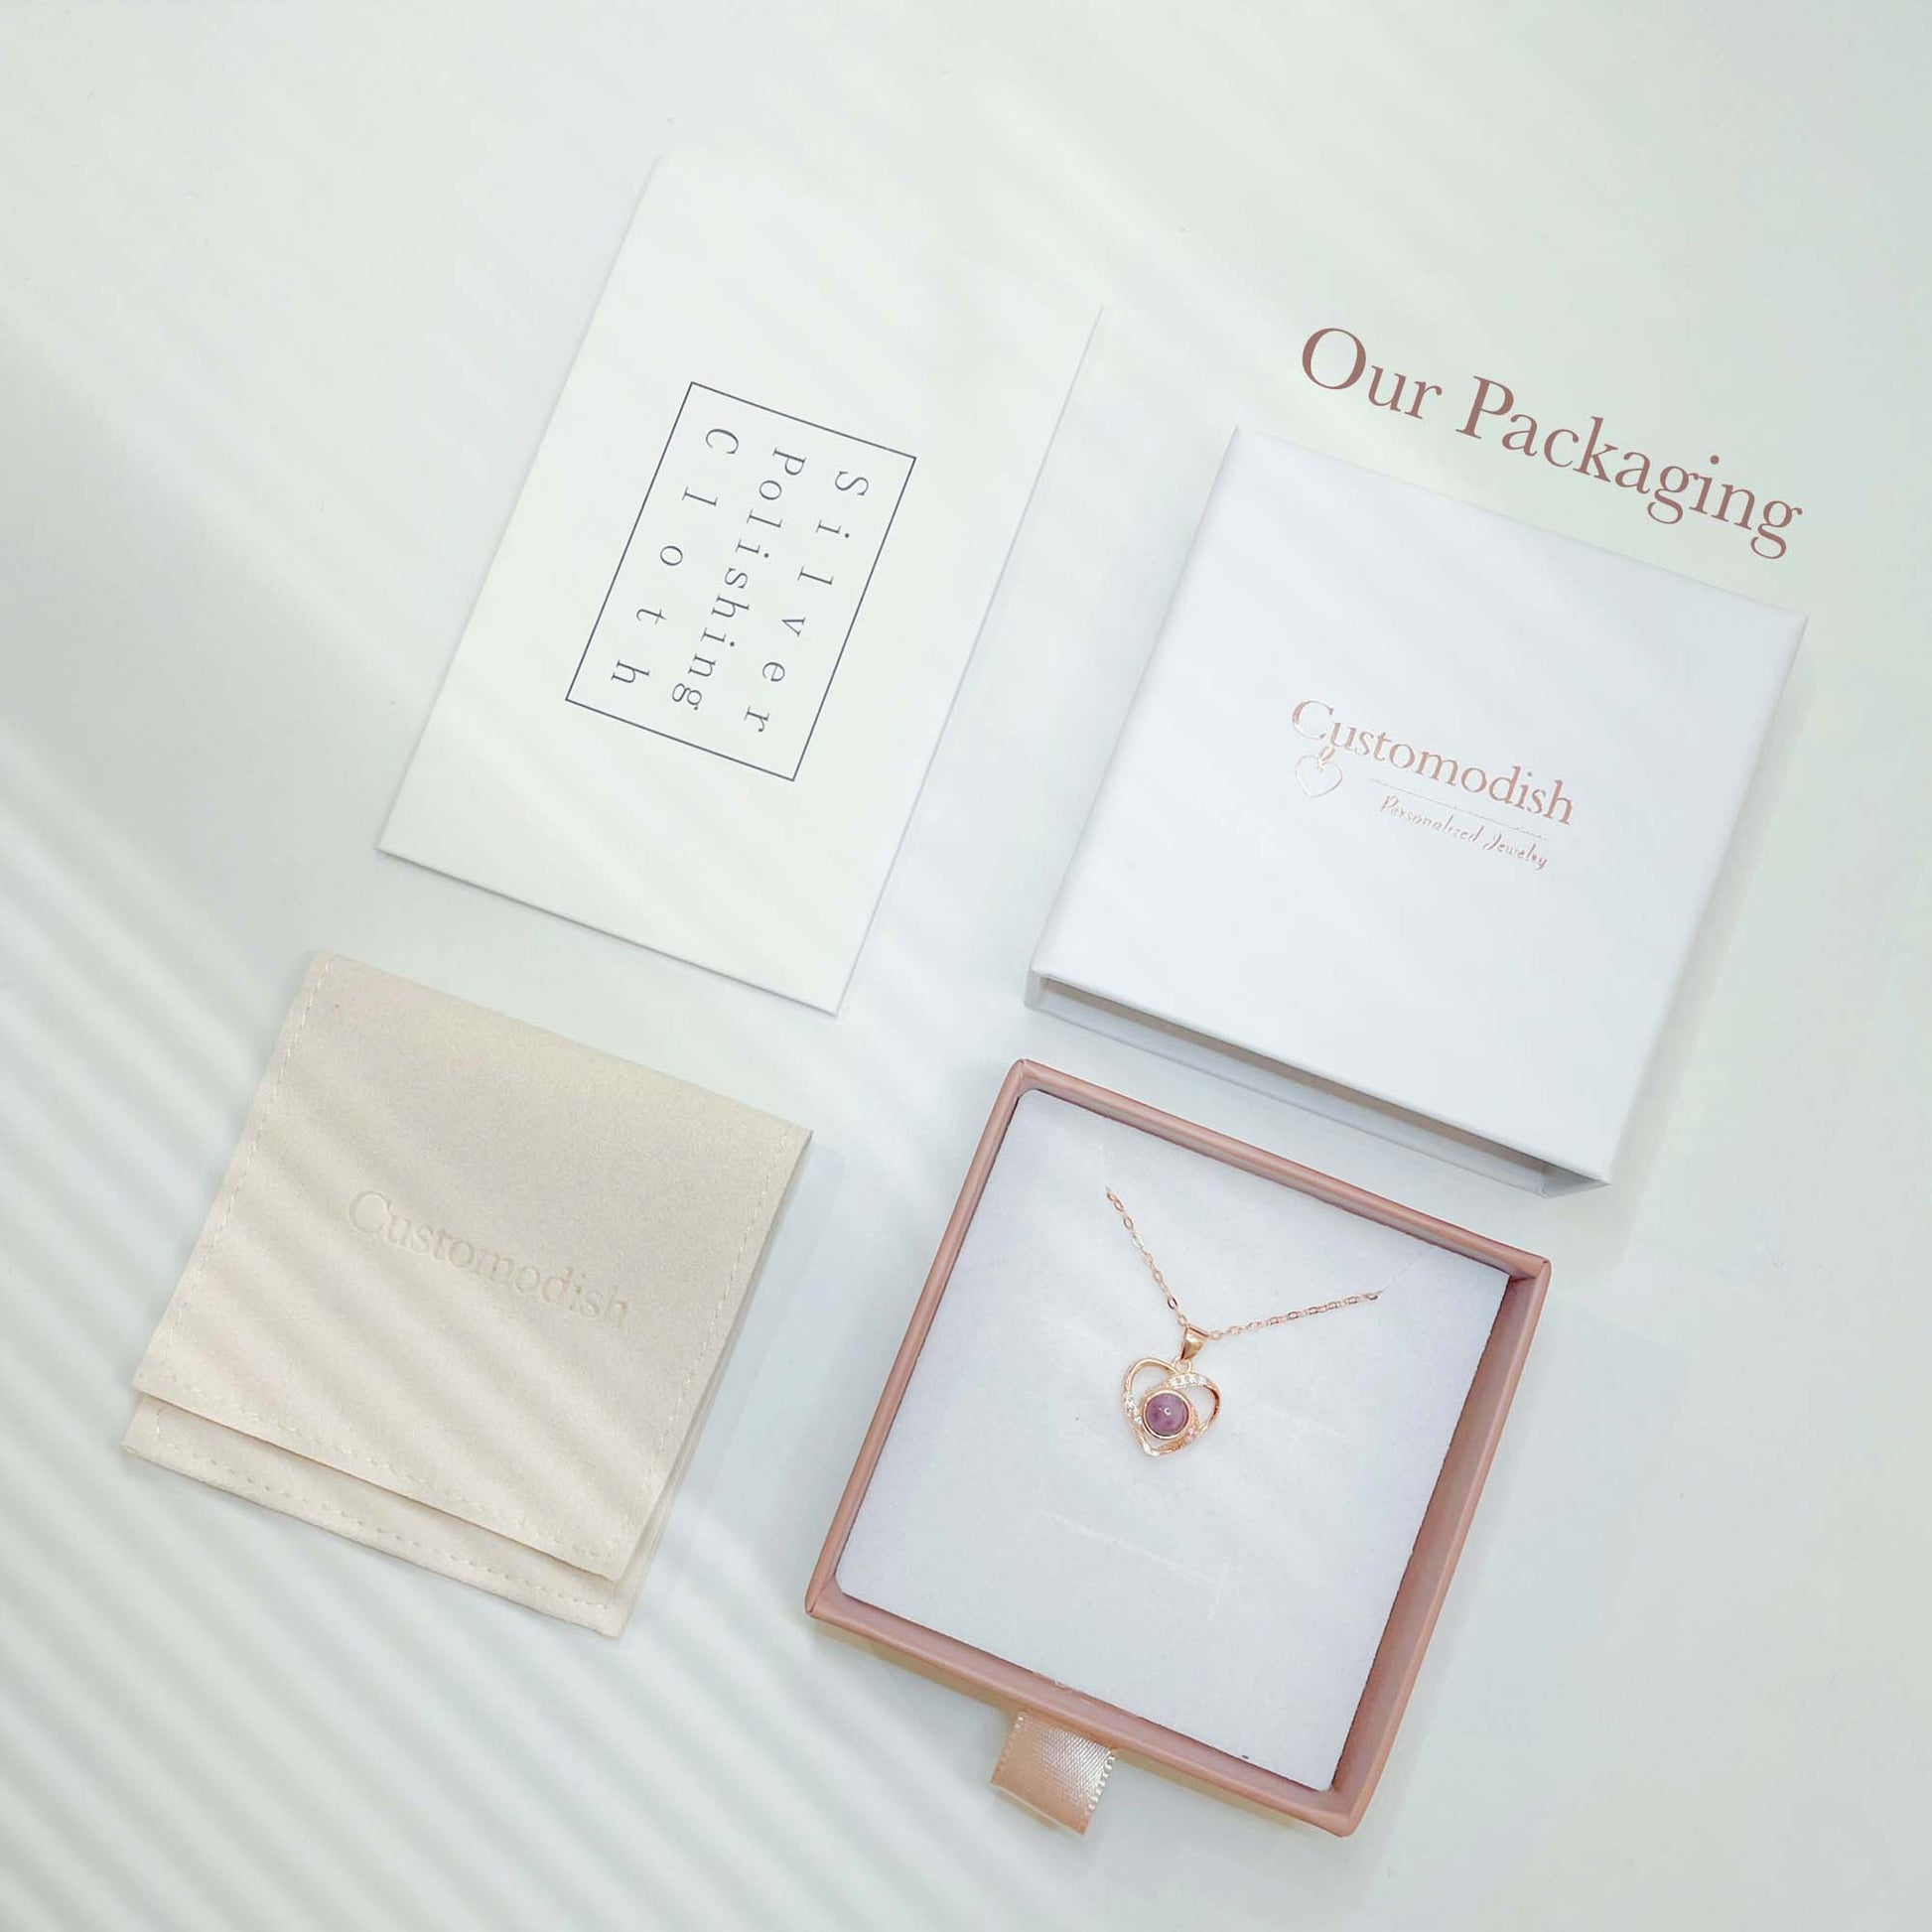 Shopping for the holiday season? Customodish projection necklaces come with a jewelry box, a jewelry pouch and a small gift bag.